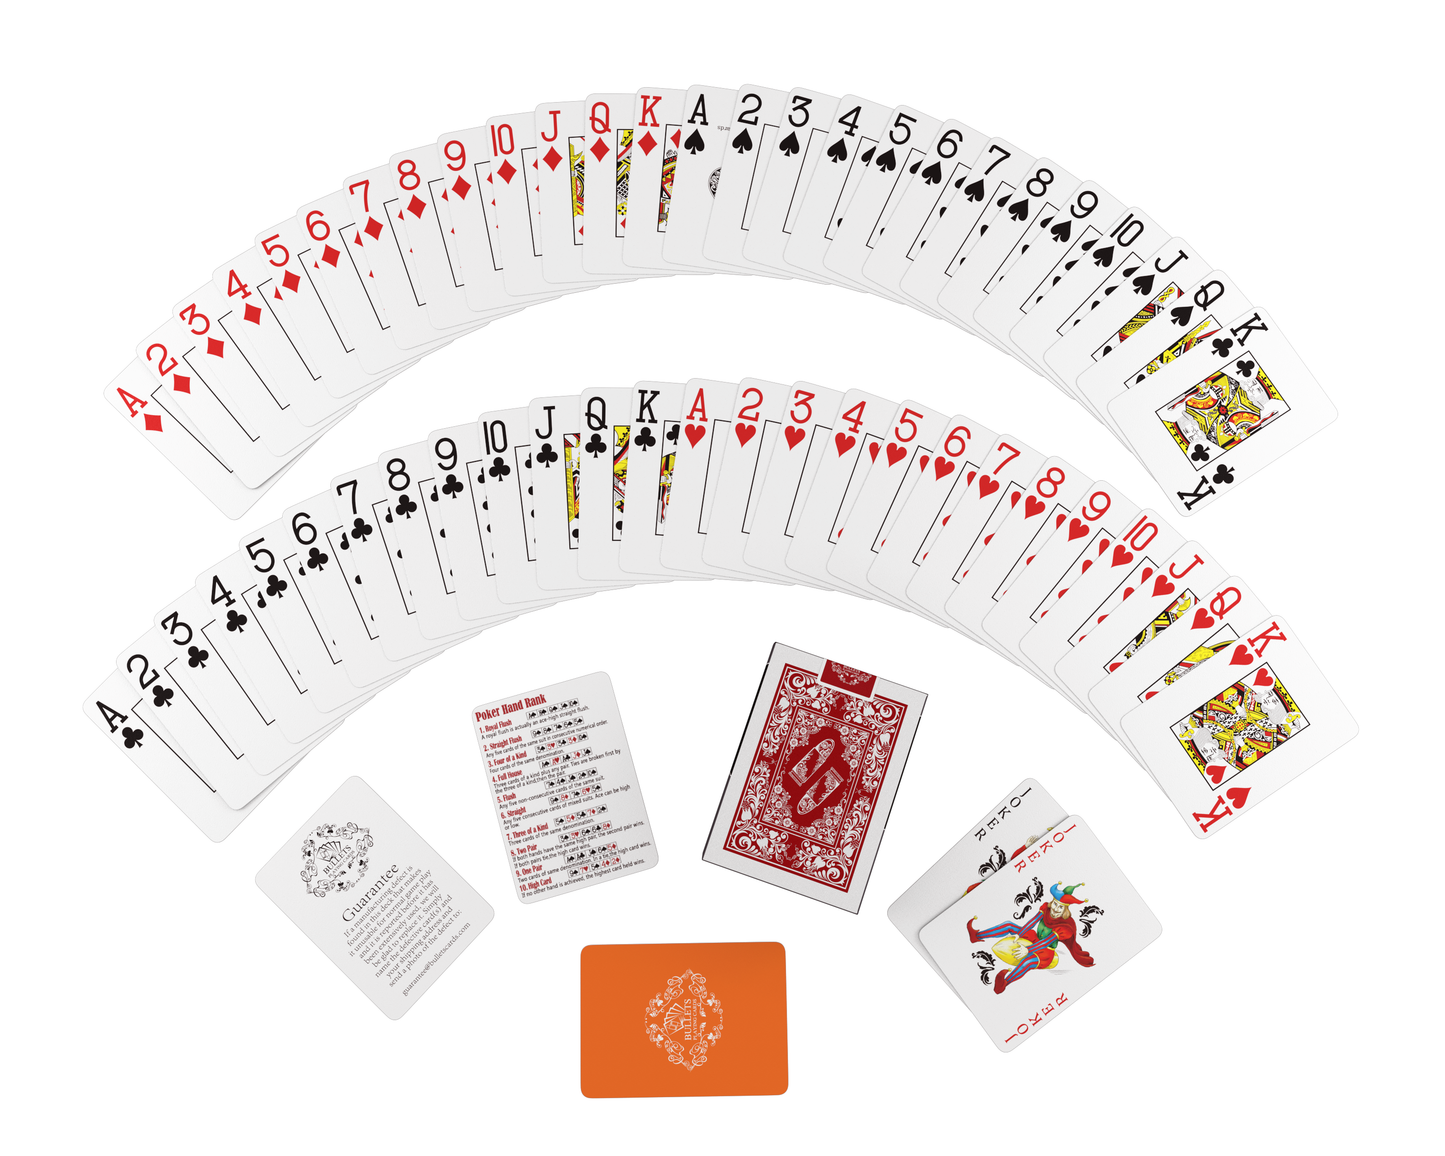 "Blackjack Deal" - 6x deck of cards of one suit (red/blue) - poker size